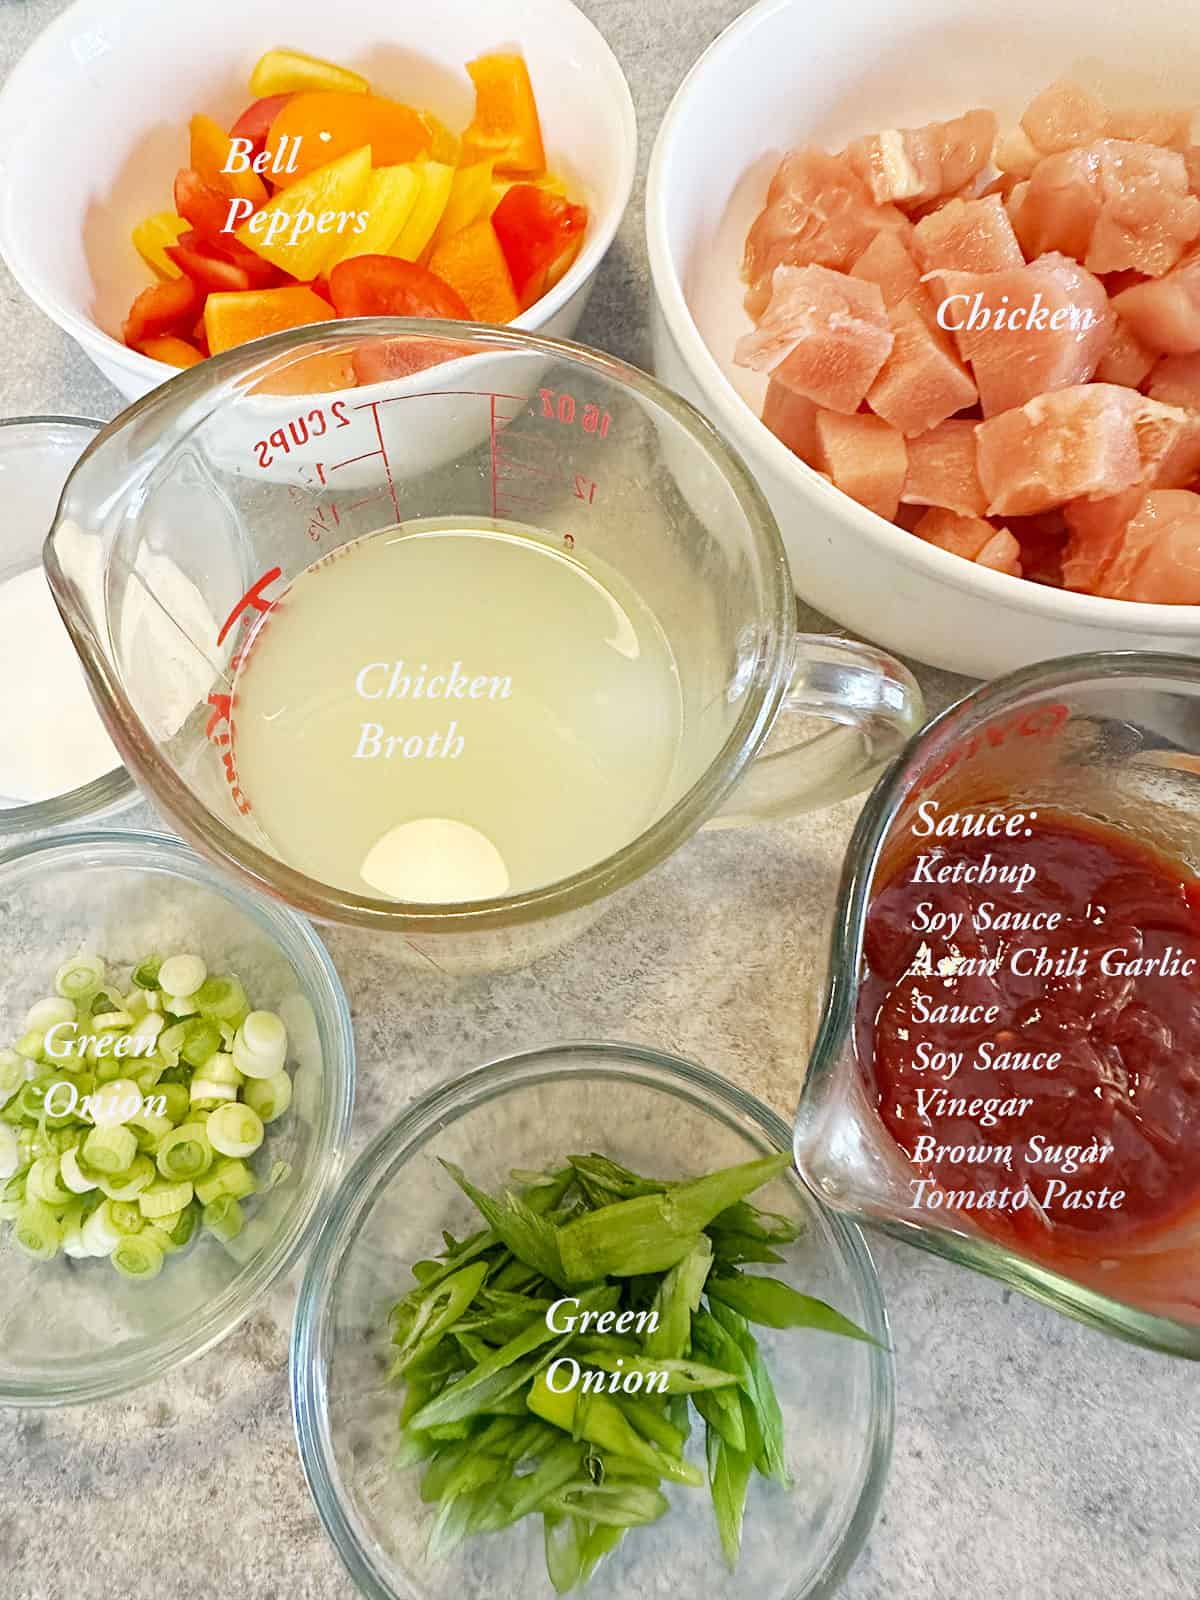 Ingredients for chicken and peppers.